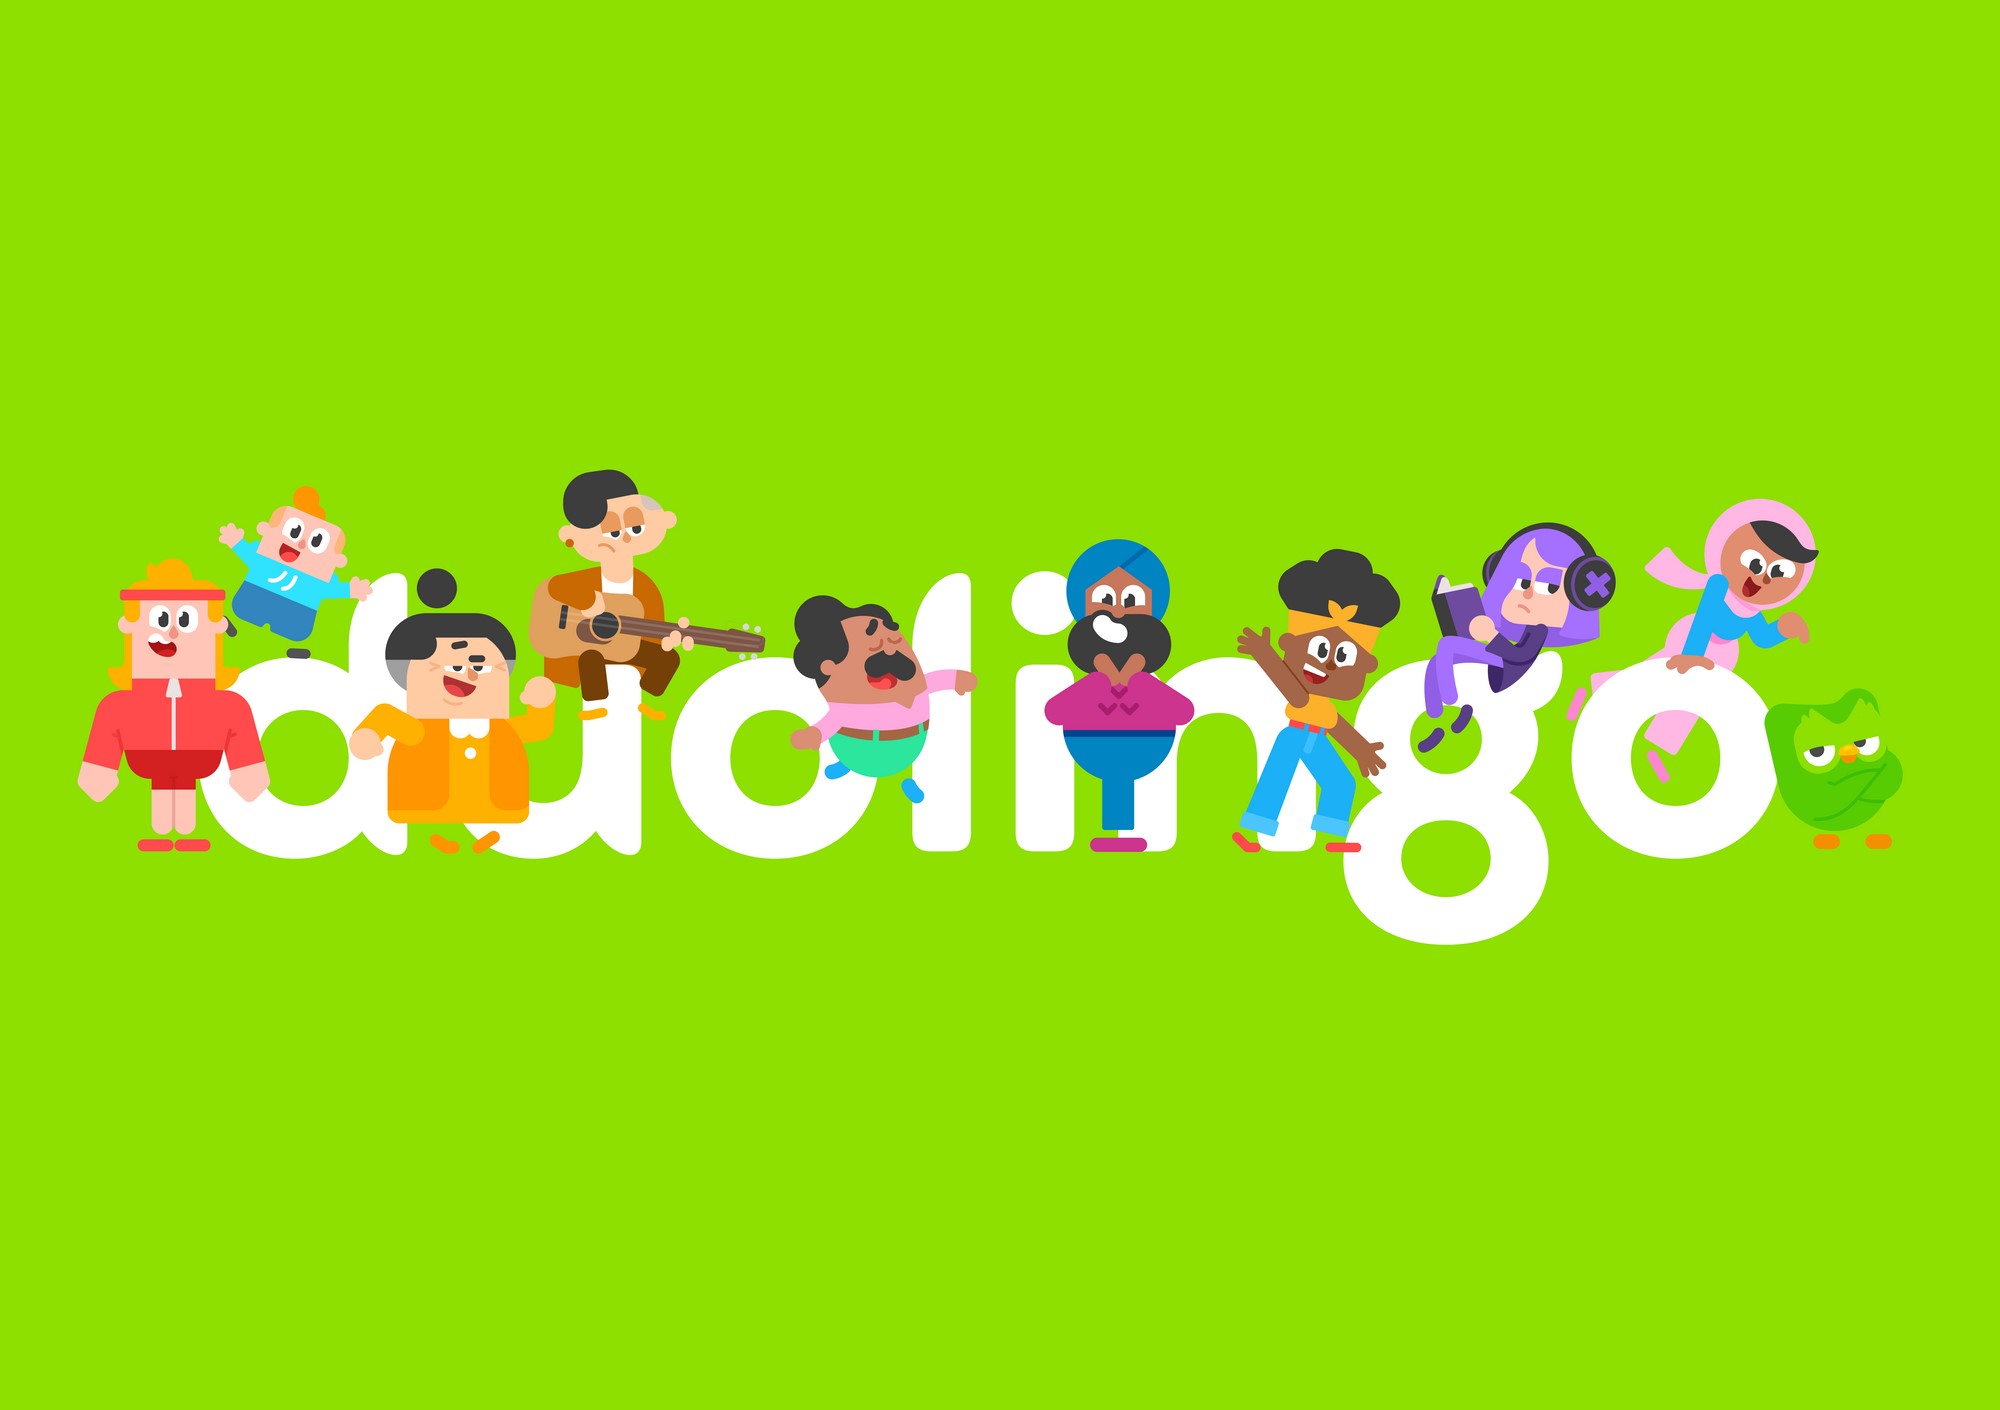 Duolingo Review: Learn A New Language In A Fun Way